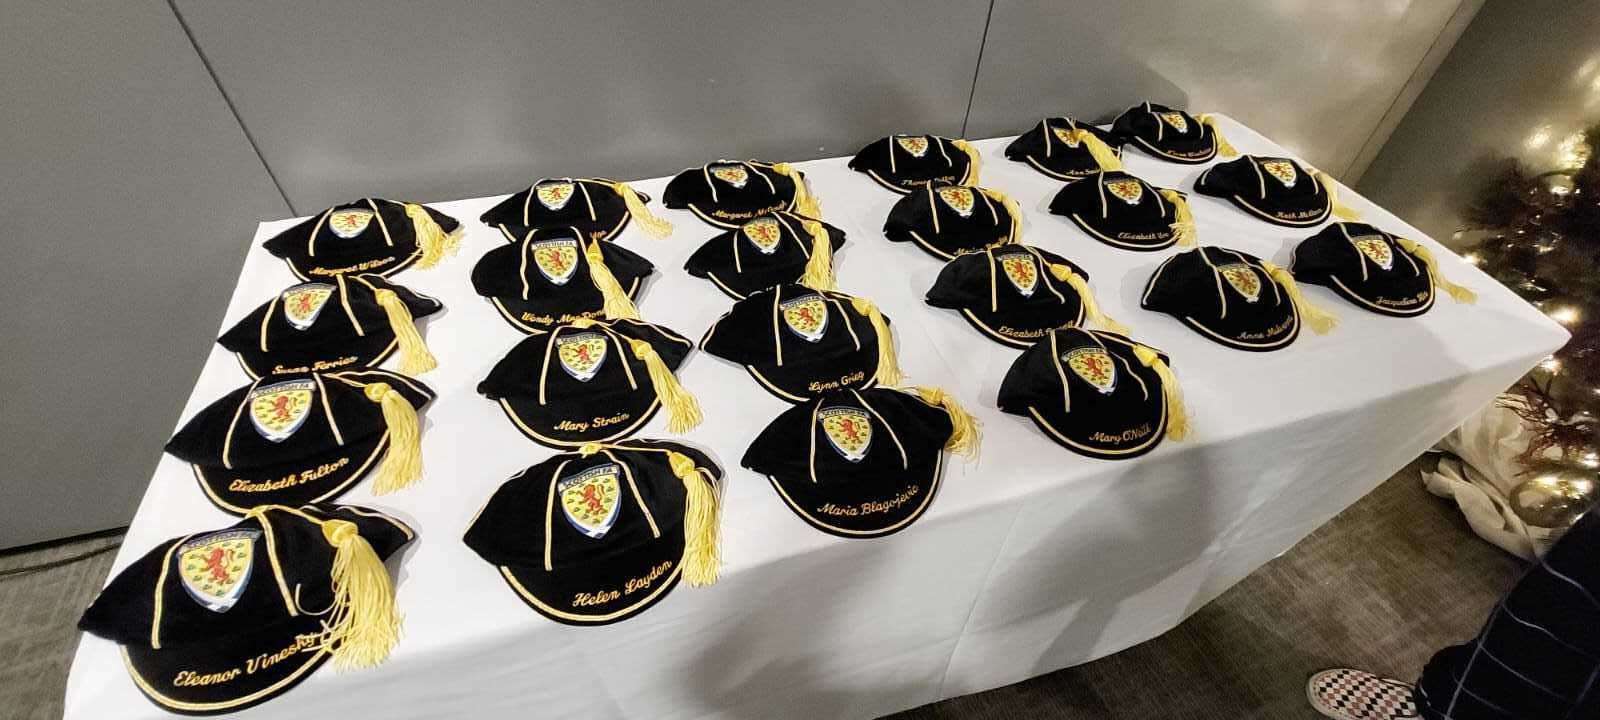 22 caps were handed out to players from the 1970s and early 1980s